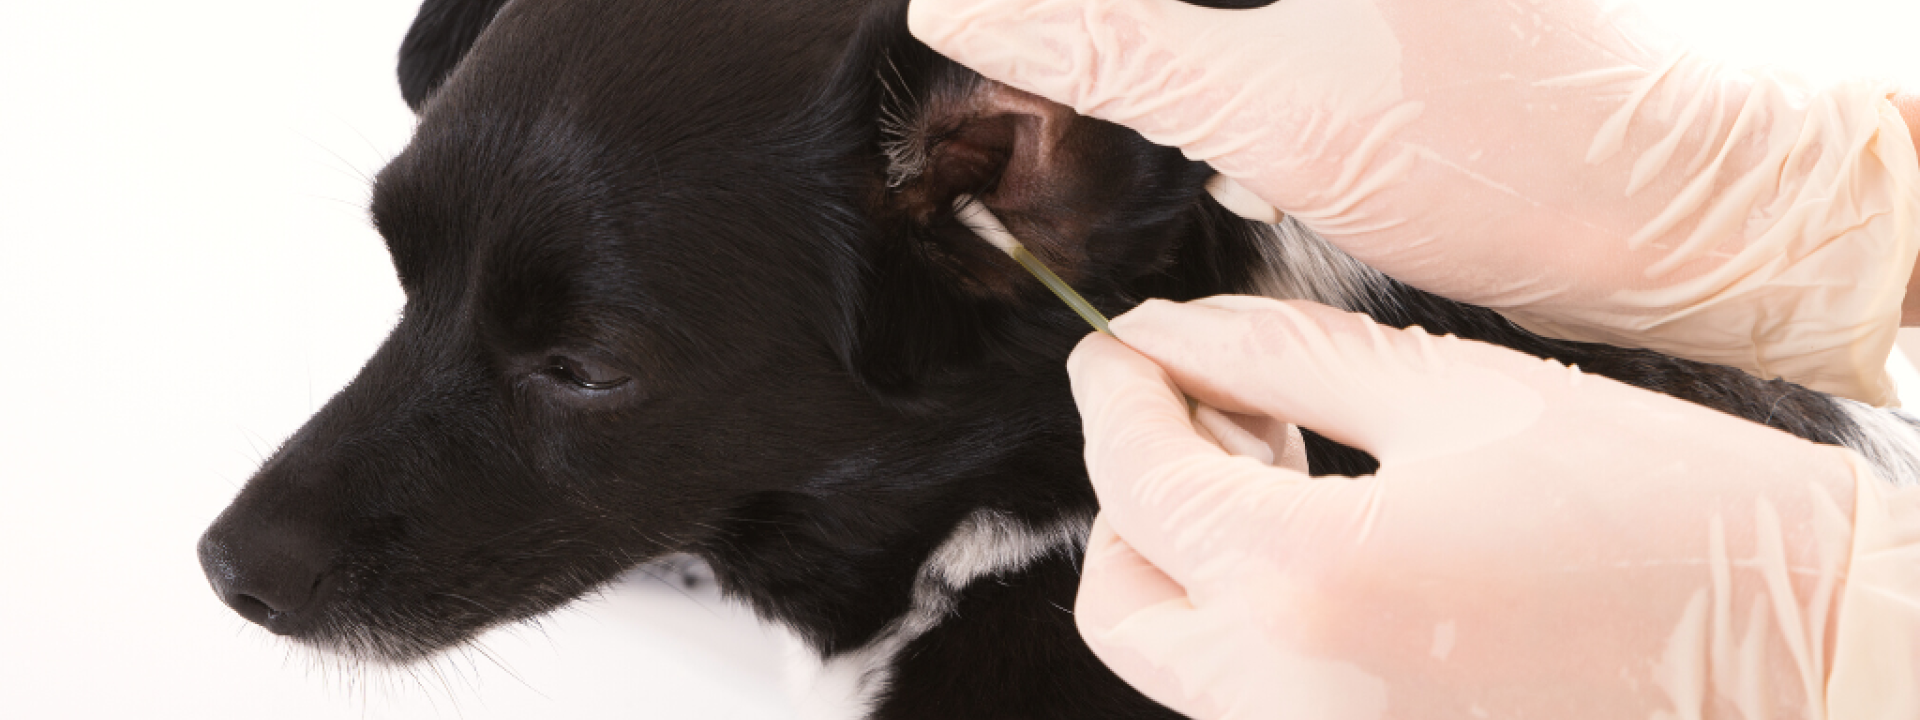 Close-up Of A Vet Cleaning Dog's Ear With Cotton Bud